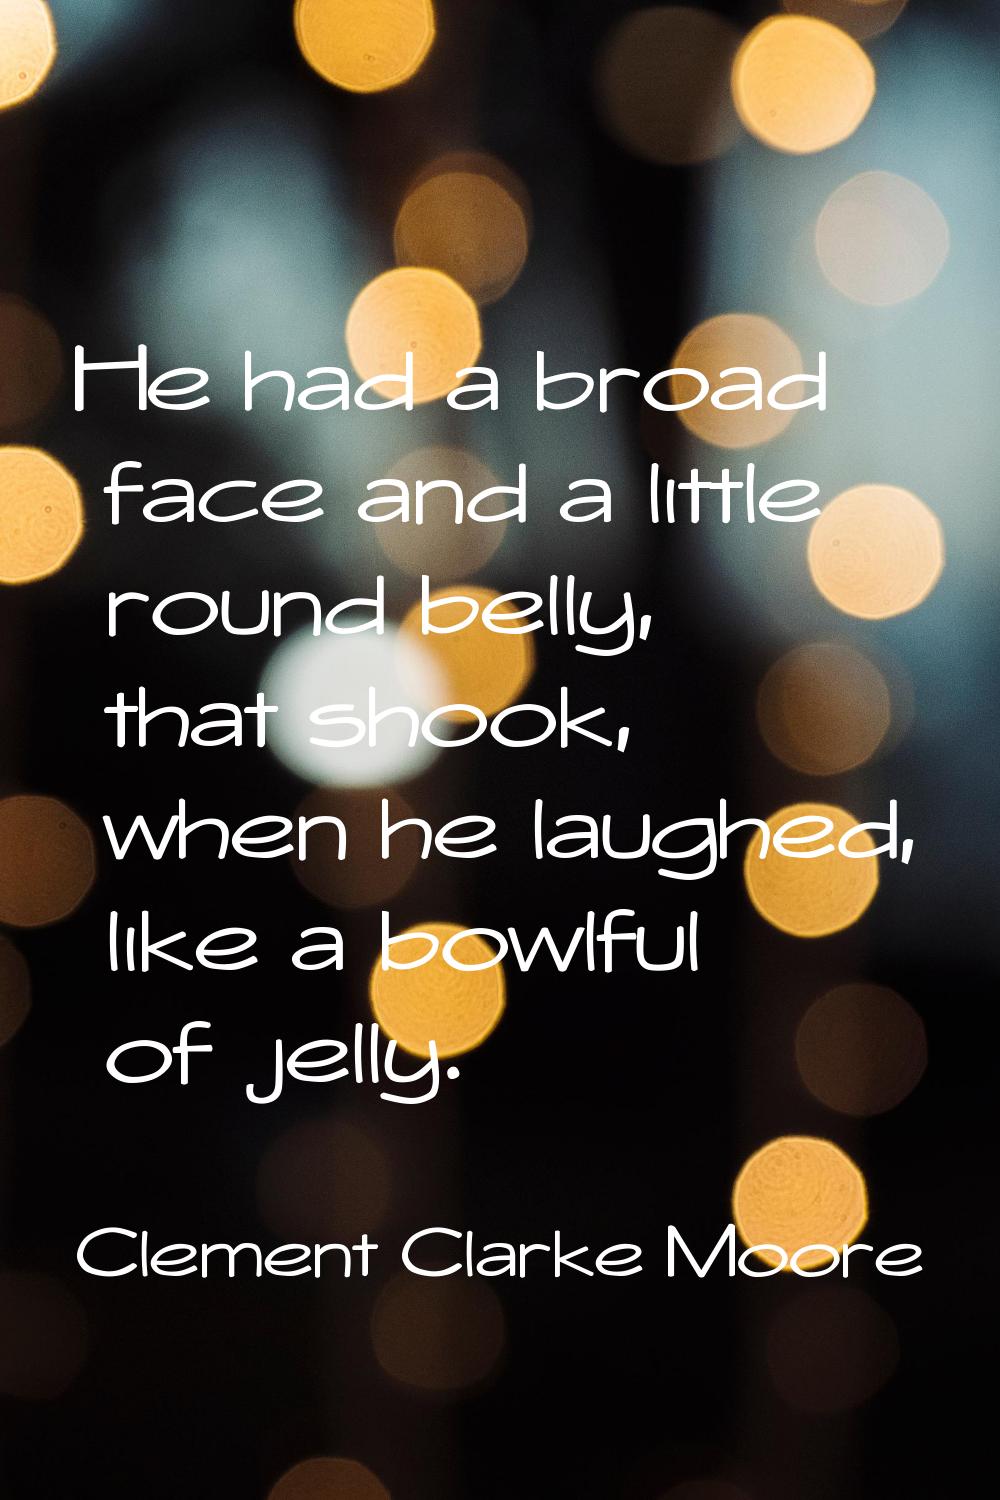 He had a broad face and a little round belly, that shook, when he laughed, like a bowlful of jelly.